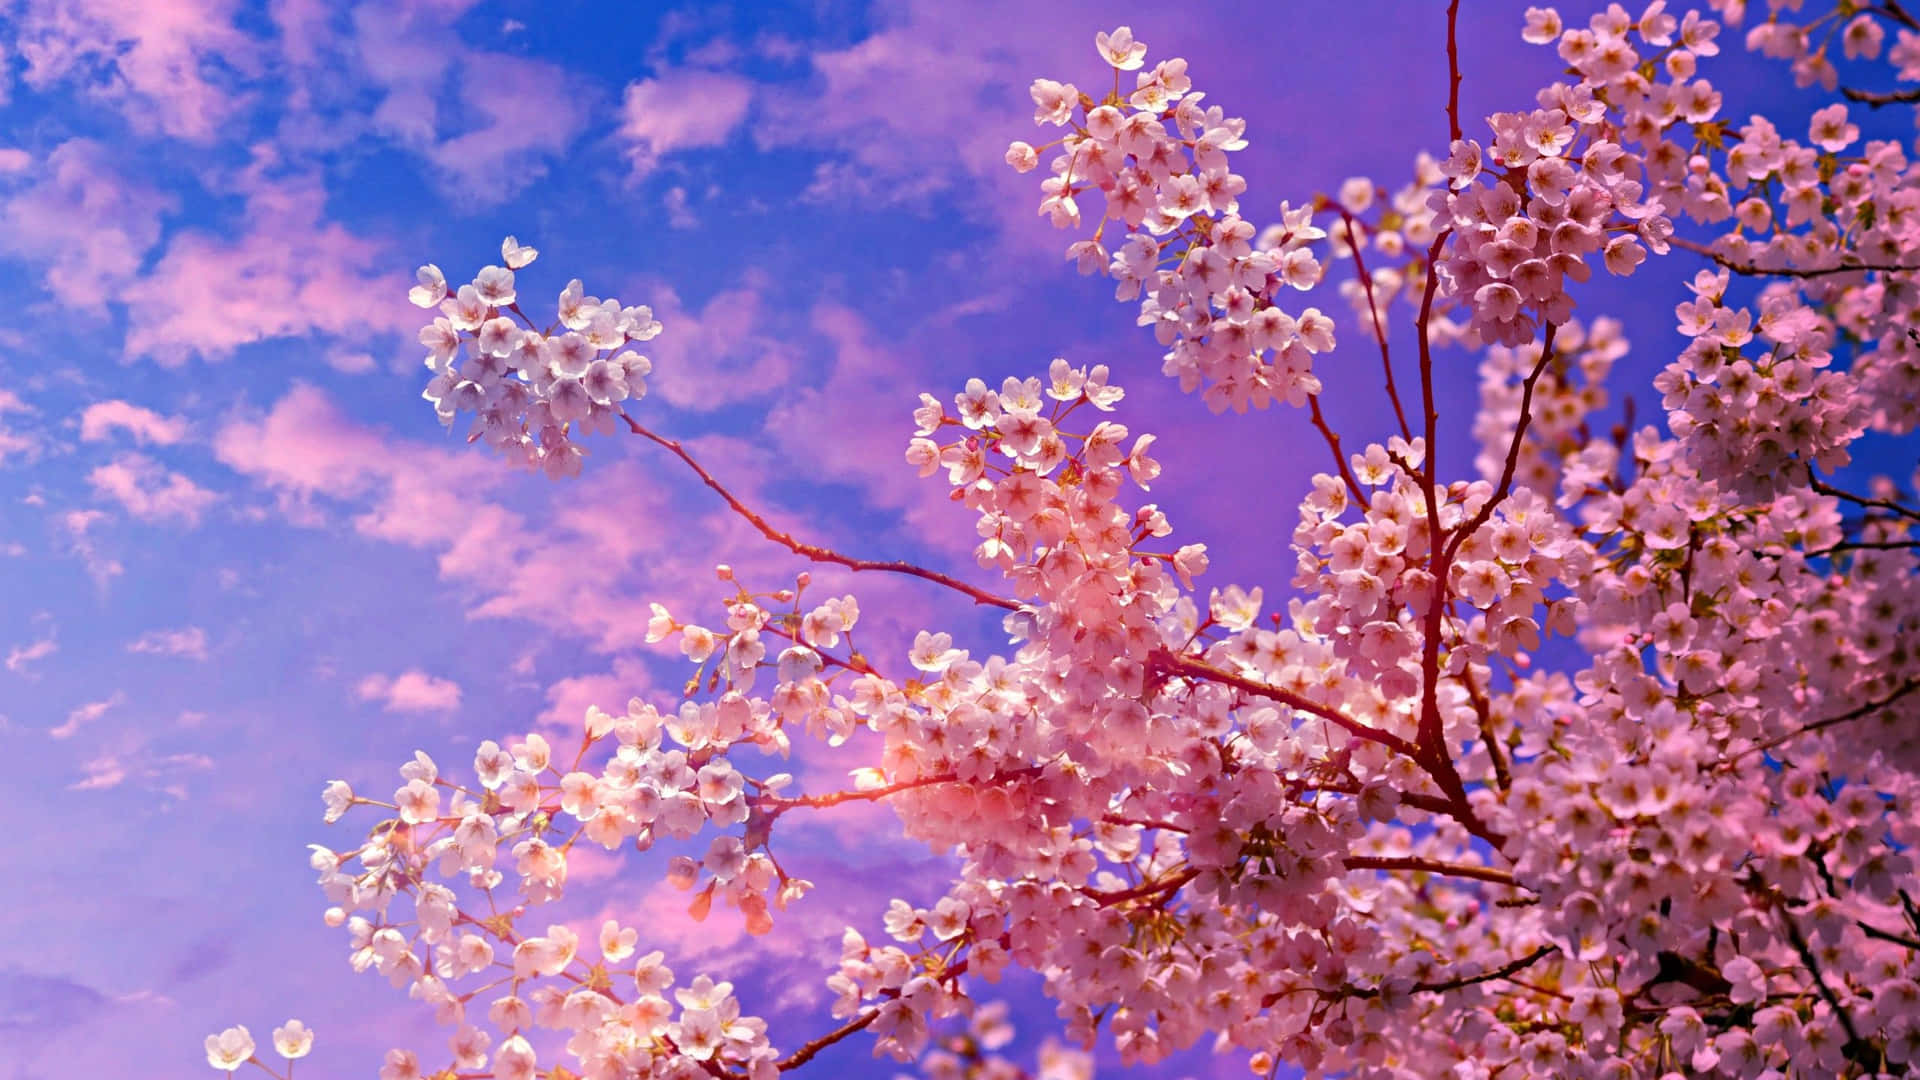 Take In The View Of Beautiful Cherry Blossoms At Night Wallpaper